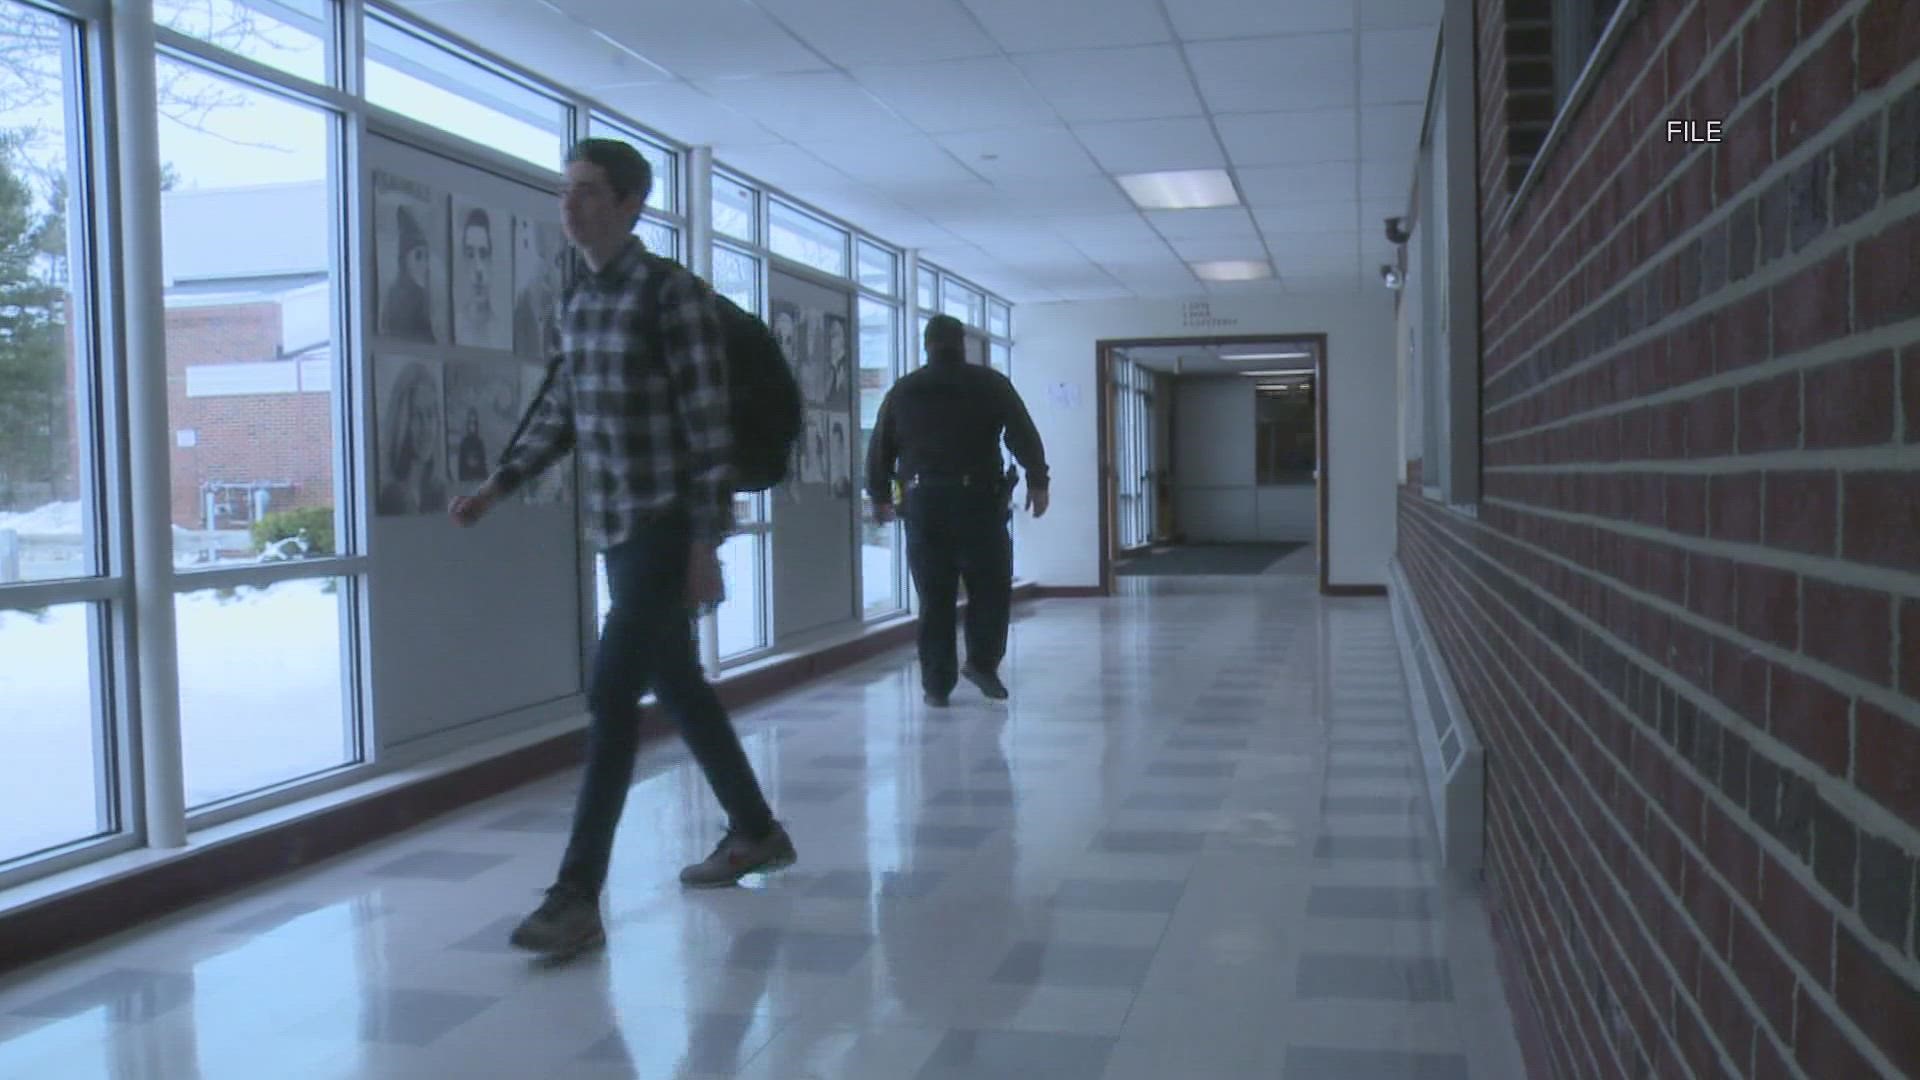 The National Association of School Resource Officers said that when a threat is made, SROs are able to quickly act while already being on scene.